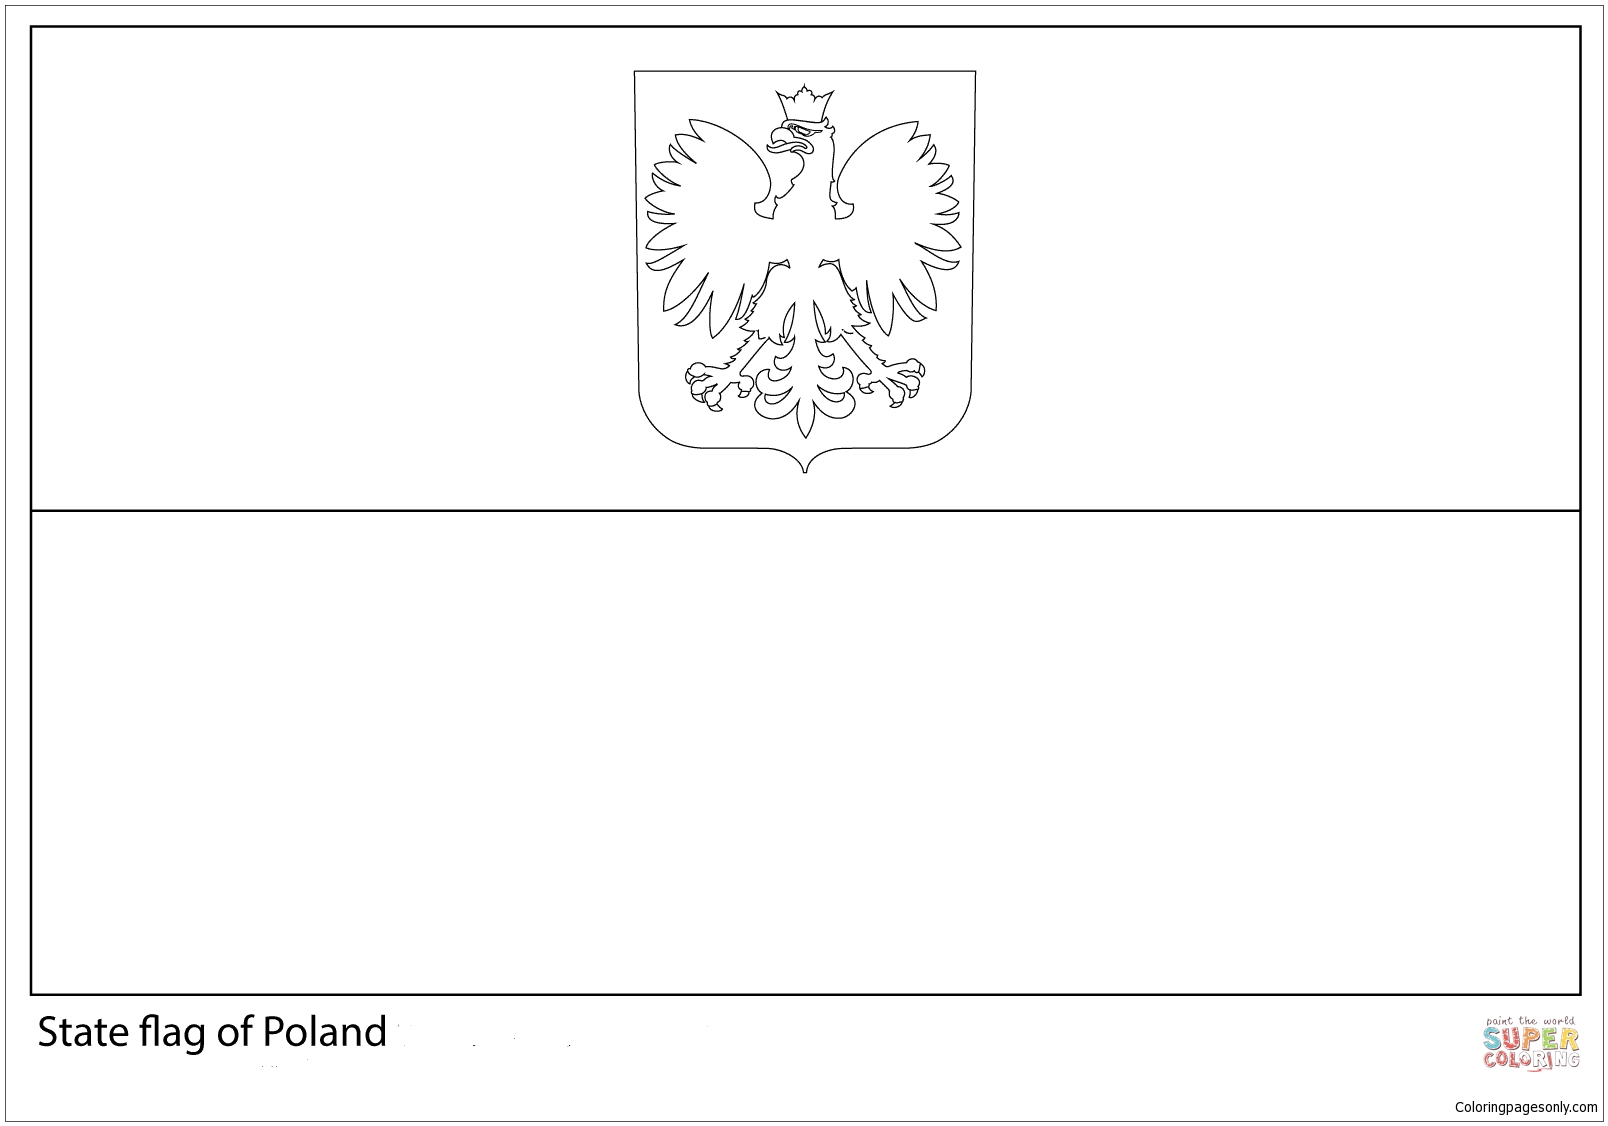 Flag of Poland-World Cup 2018 from World Cup 2018 Flags